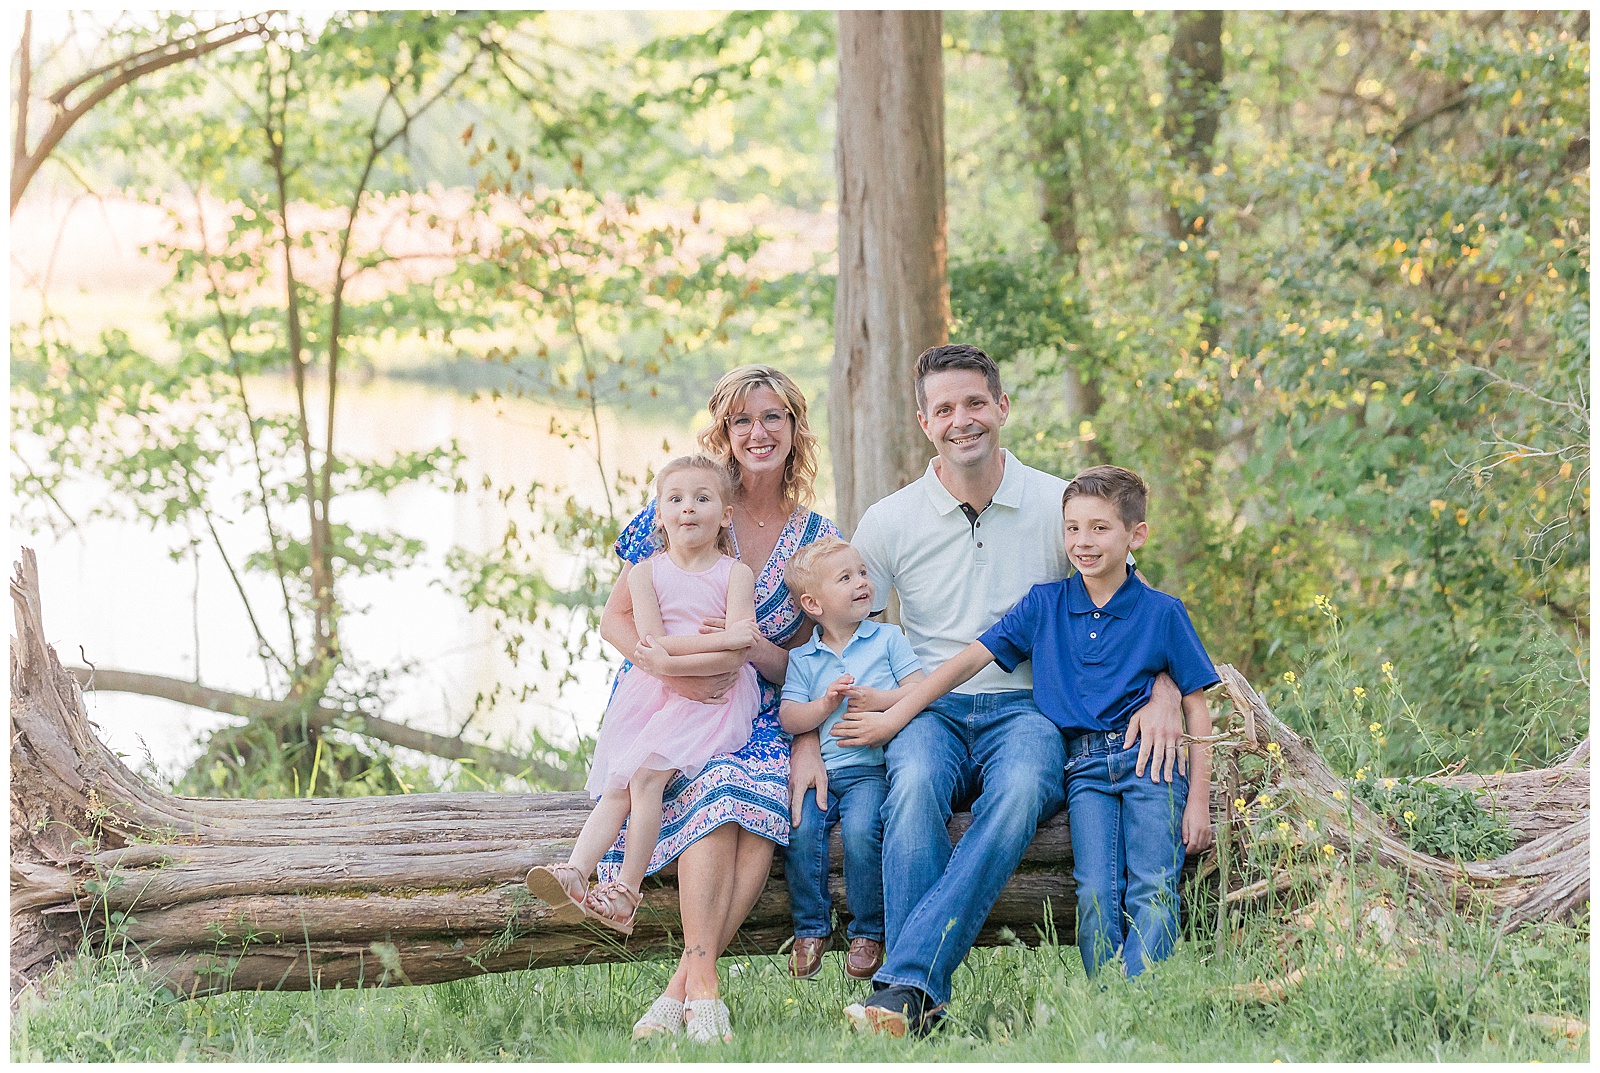 Oliphant family portrait on a down tree in Townsend, Delaware by Delaware family photographer Christopher Ginn Photogrpahy.